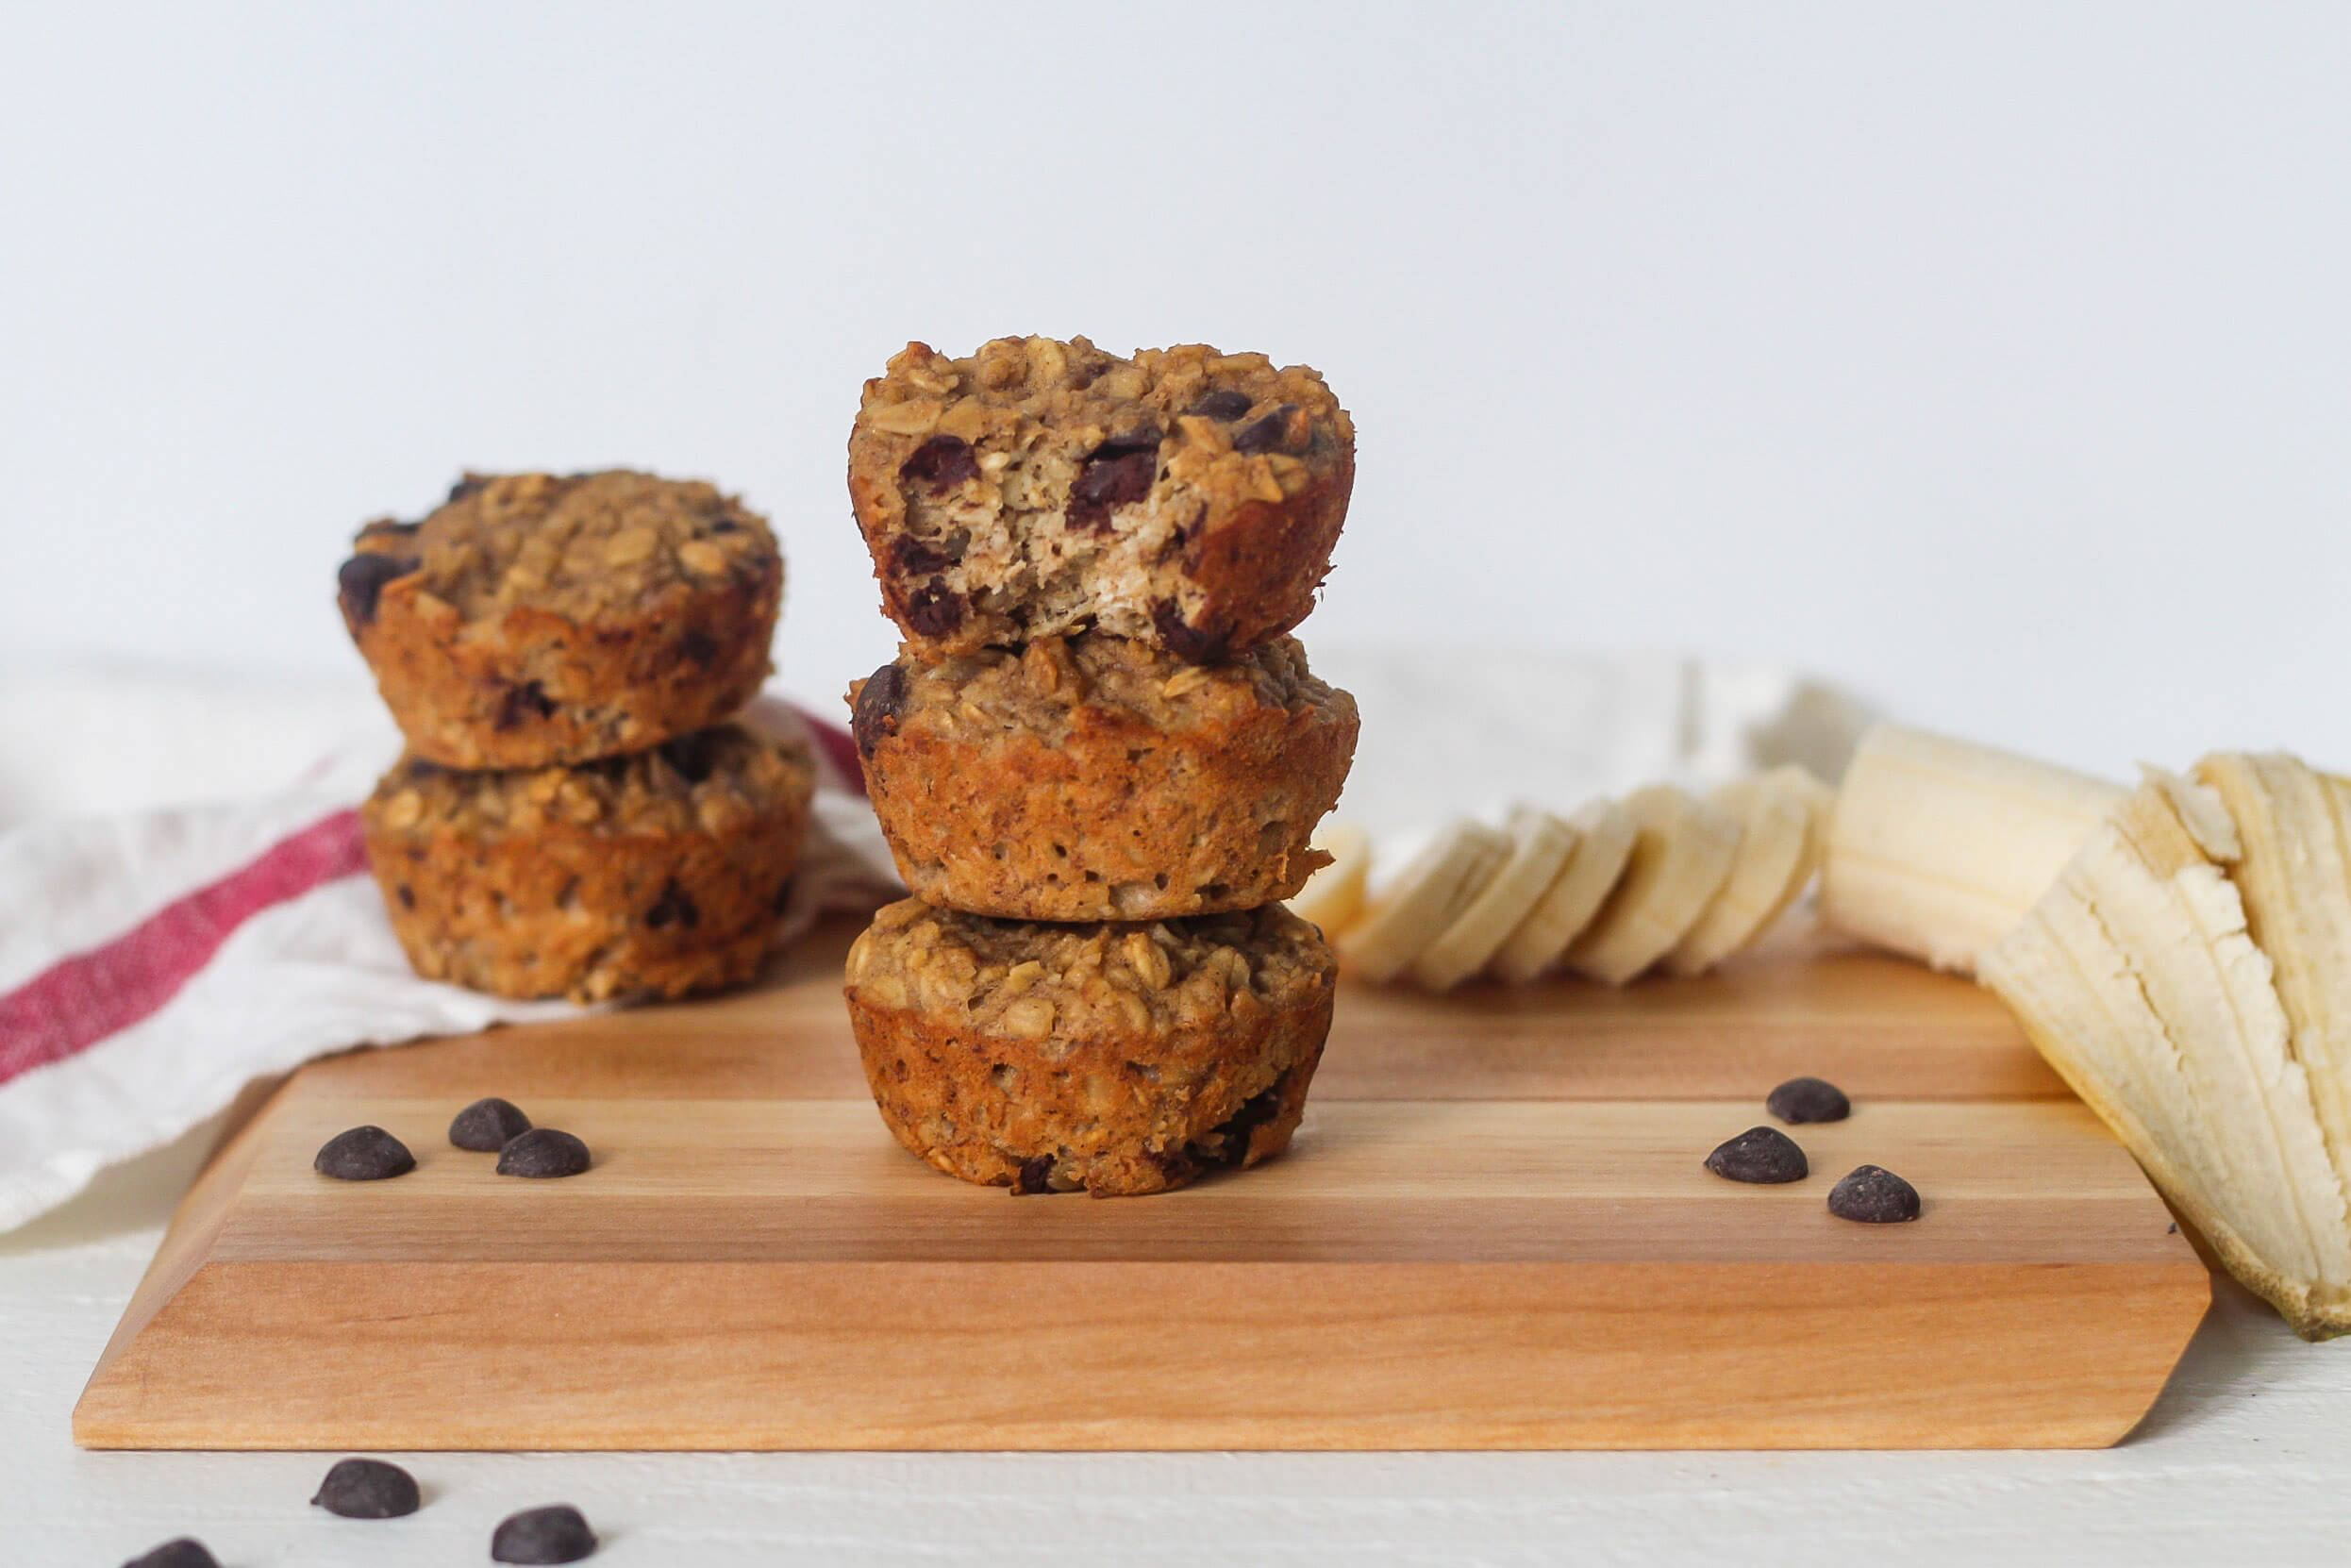 20 Freezer Friendly Meal Ideas: Banana Chocolate Chip Cups